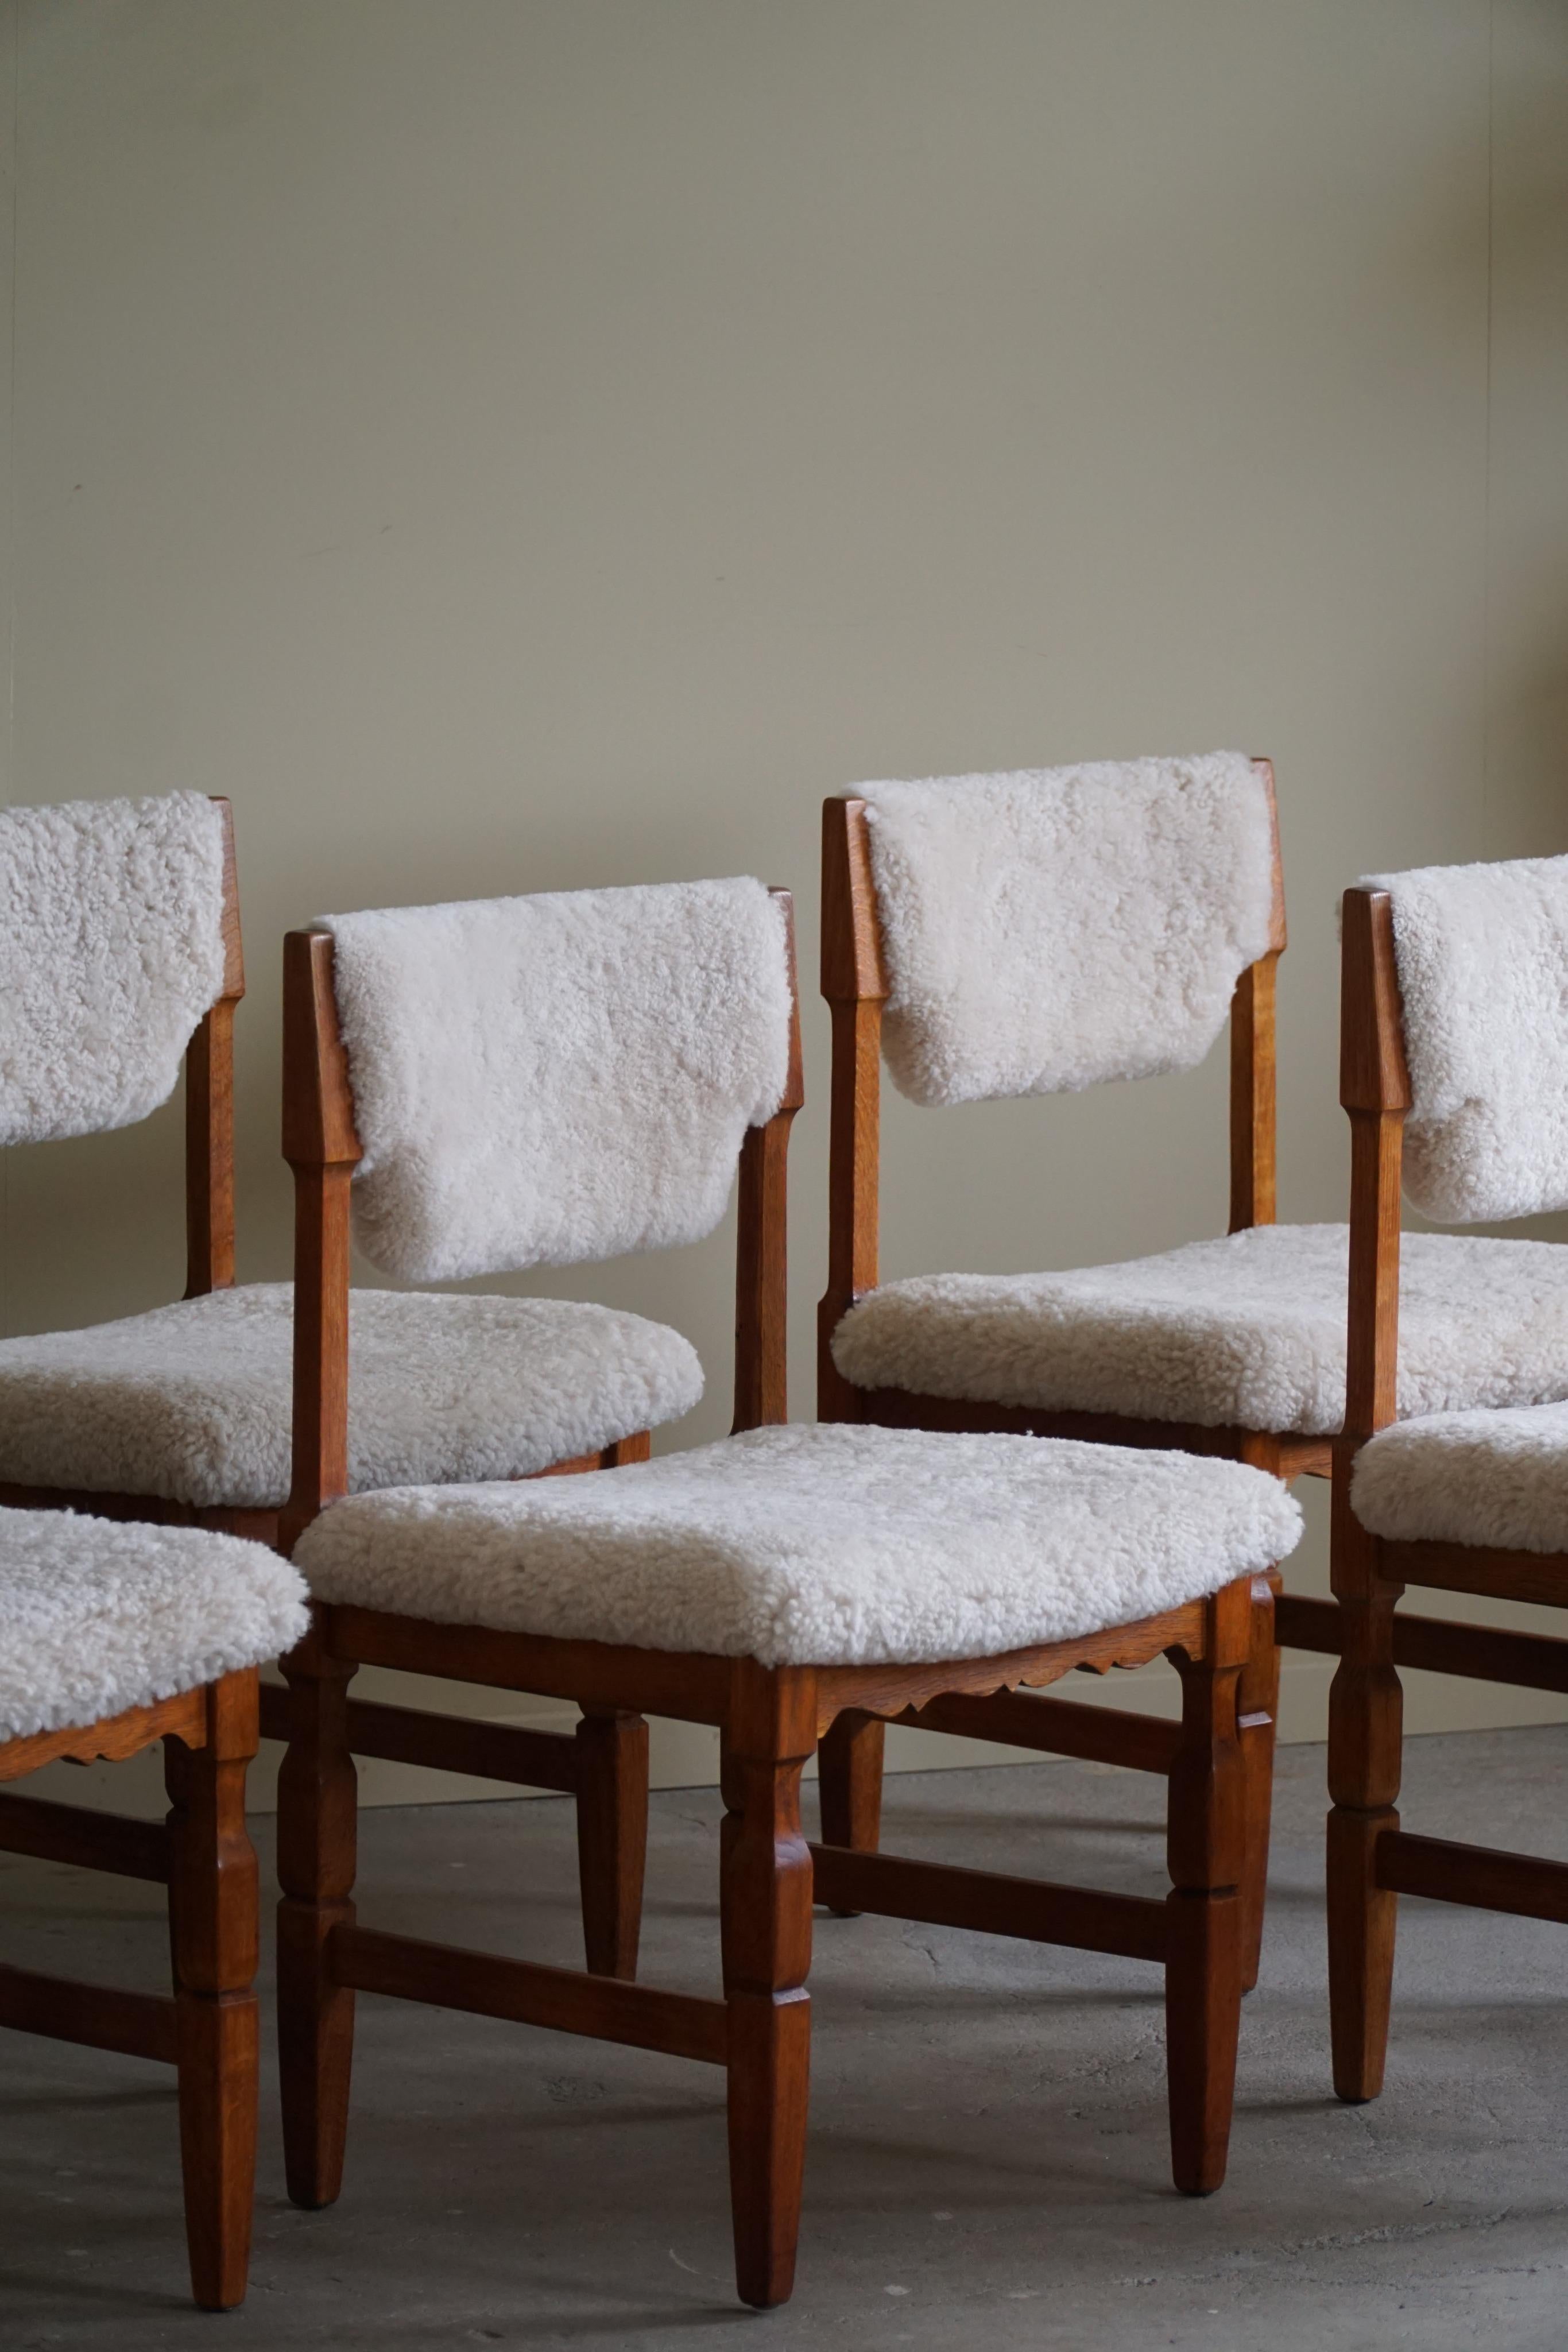 Set of 6 Dining Chairs in Oak & Lambswool, Danish Mid Century Modern, 1960s For Sale 9